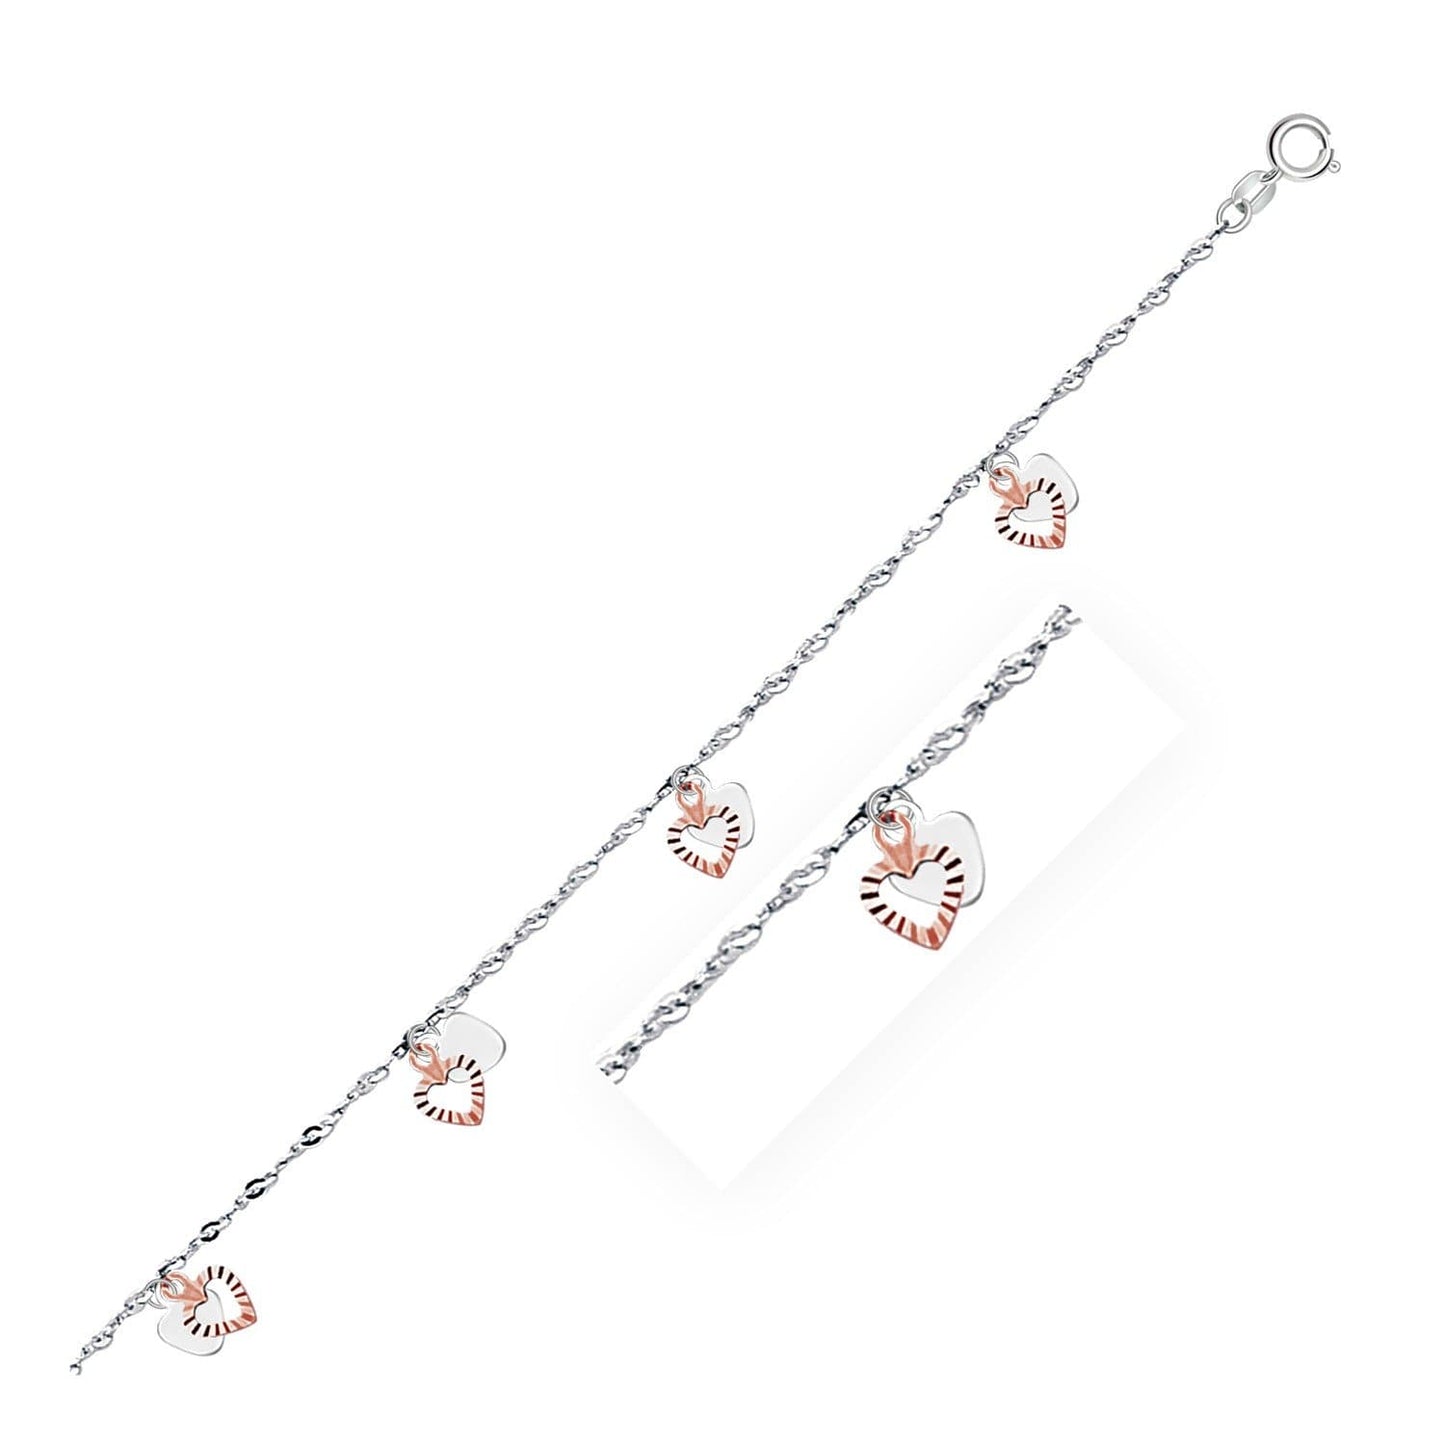 Dual Heart Charms Anklet in 2-Tone 14k Gold